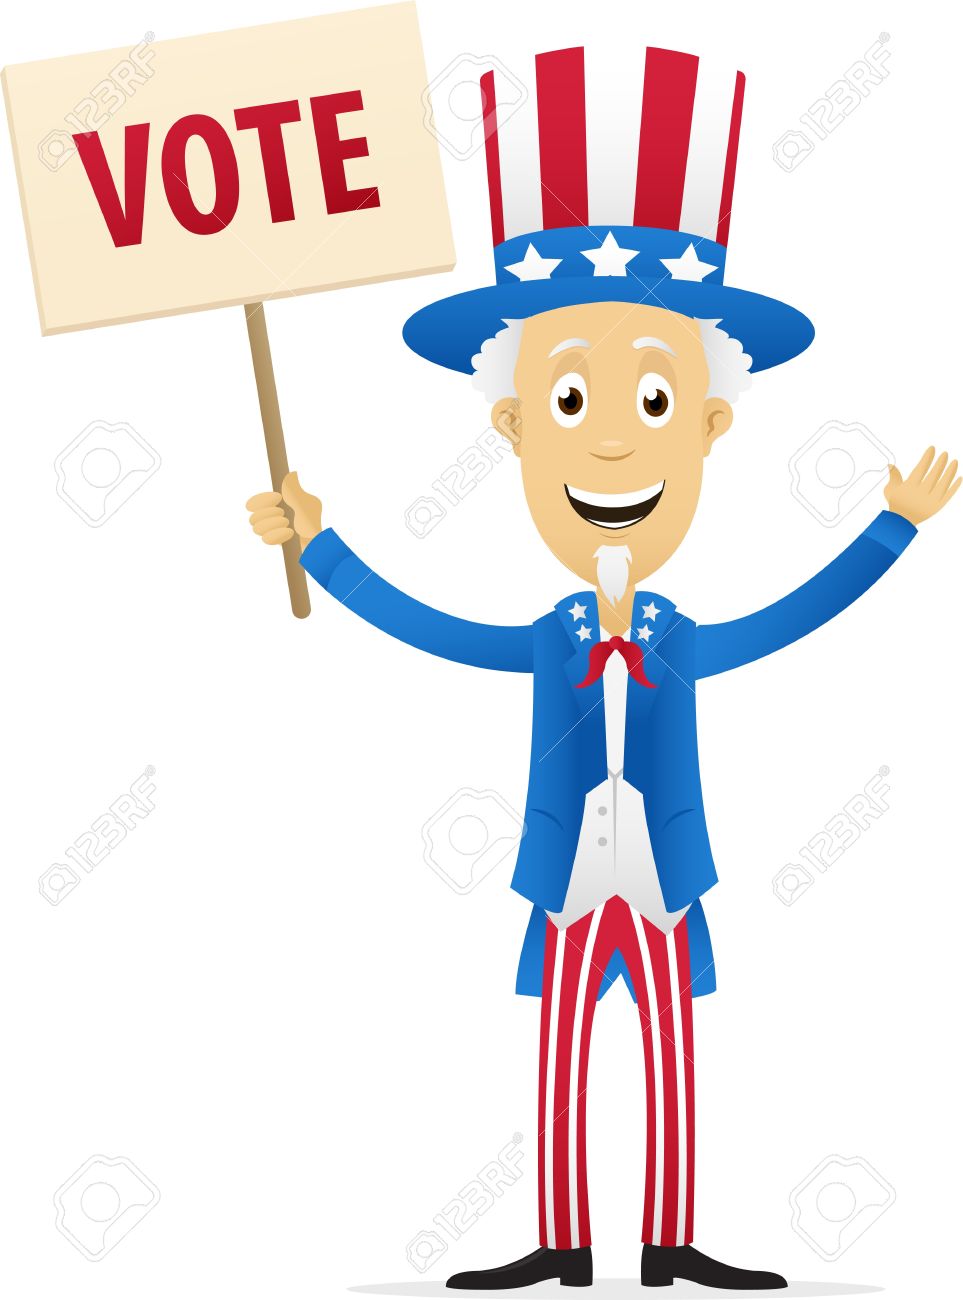 Digitally Generated Image Of Uncle Sam Holding Vote Placard.